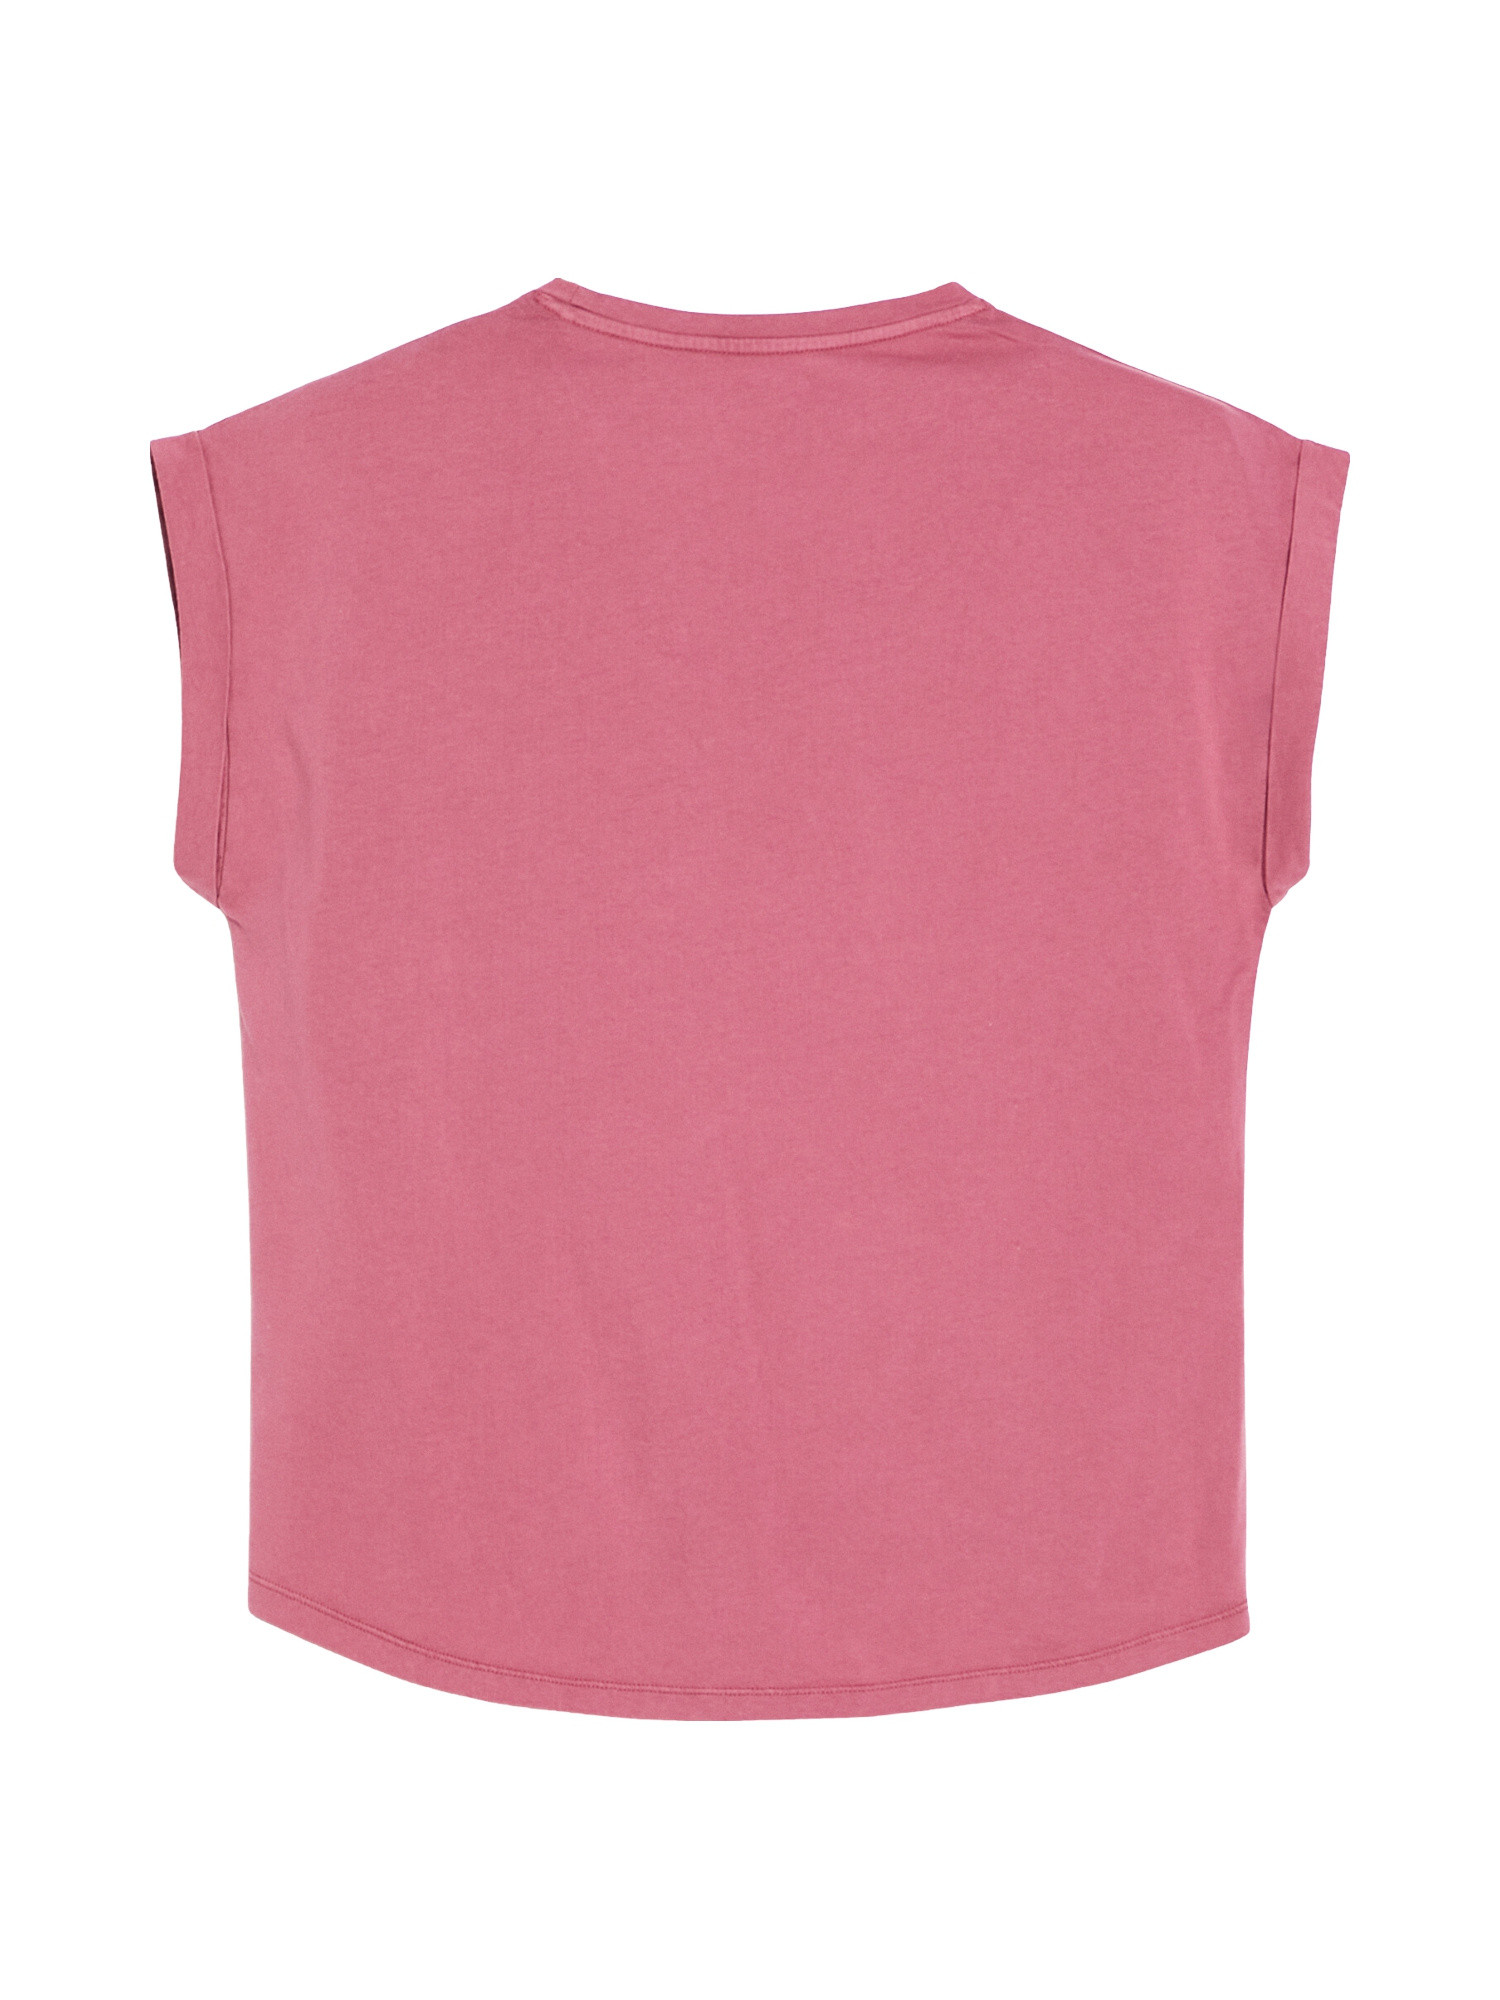 Pepe Jeans - T-shirt con logo in cotone, Rosa scuro, large image number 1